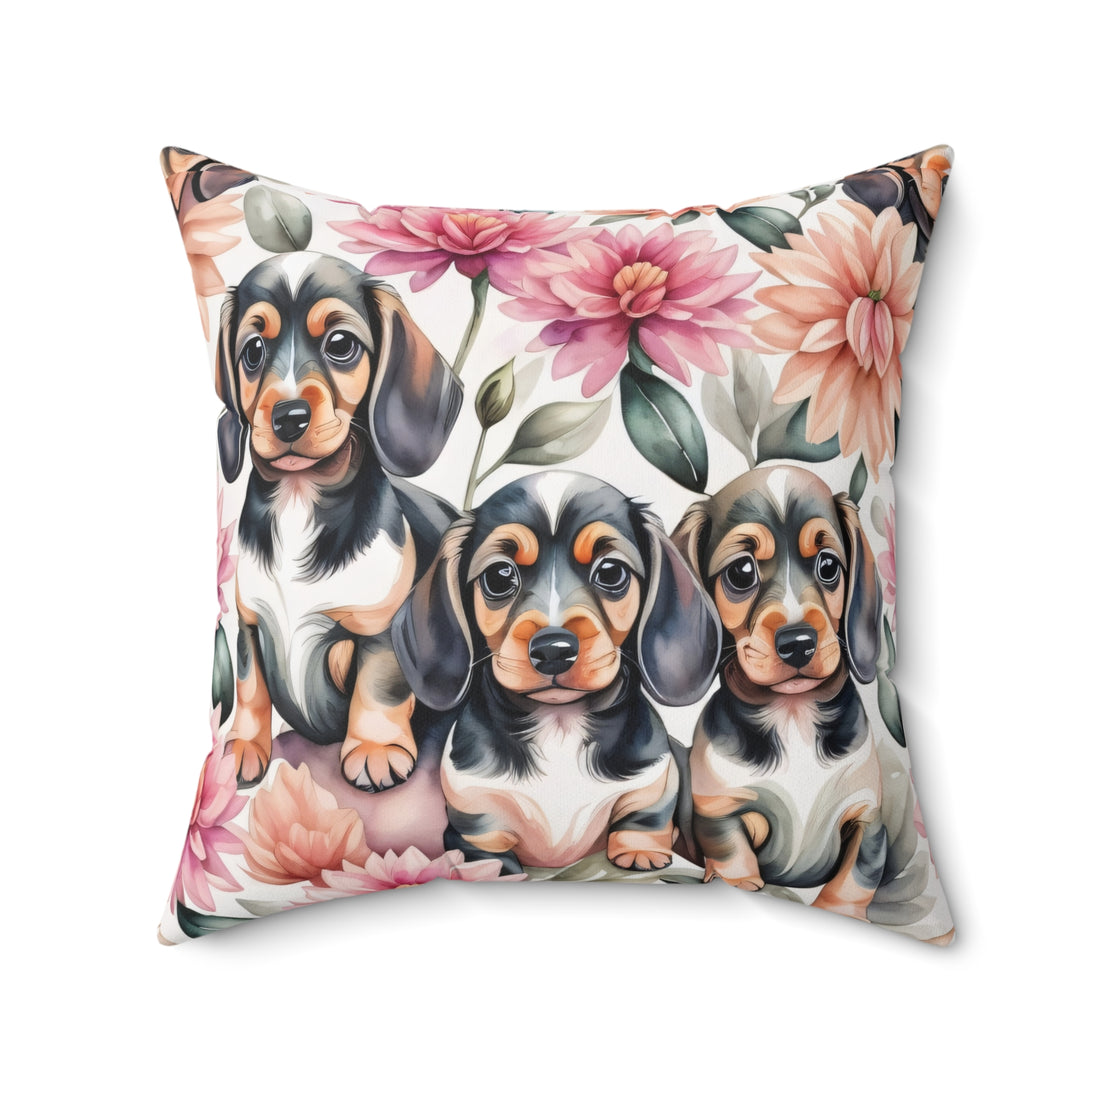 Dahlias and Dachshunds Polyester Square Pillow